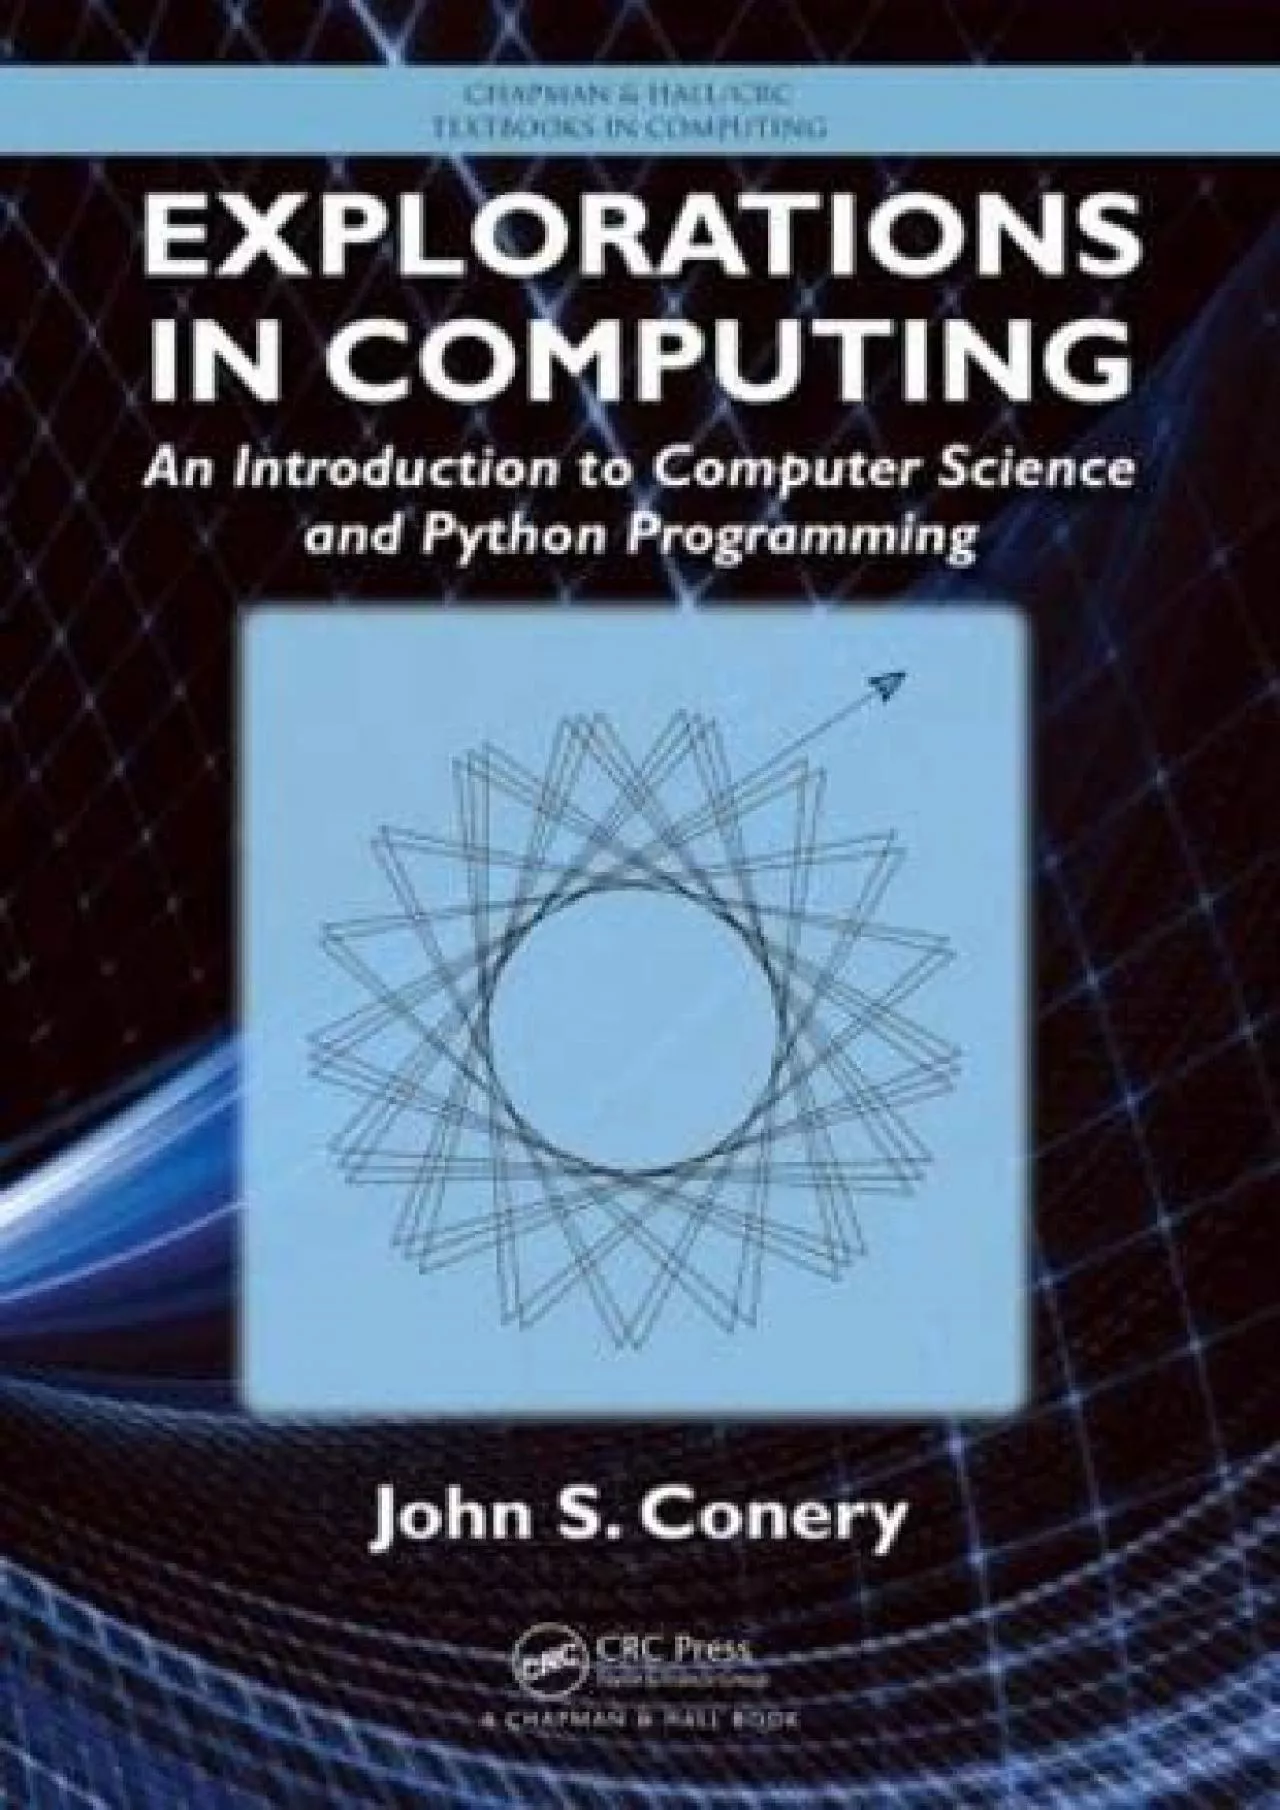 [READING BOOK]-Explorations in Computing: An Introduction to Computer Science and Python